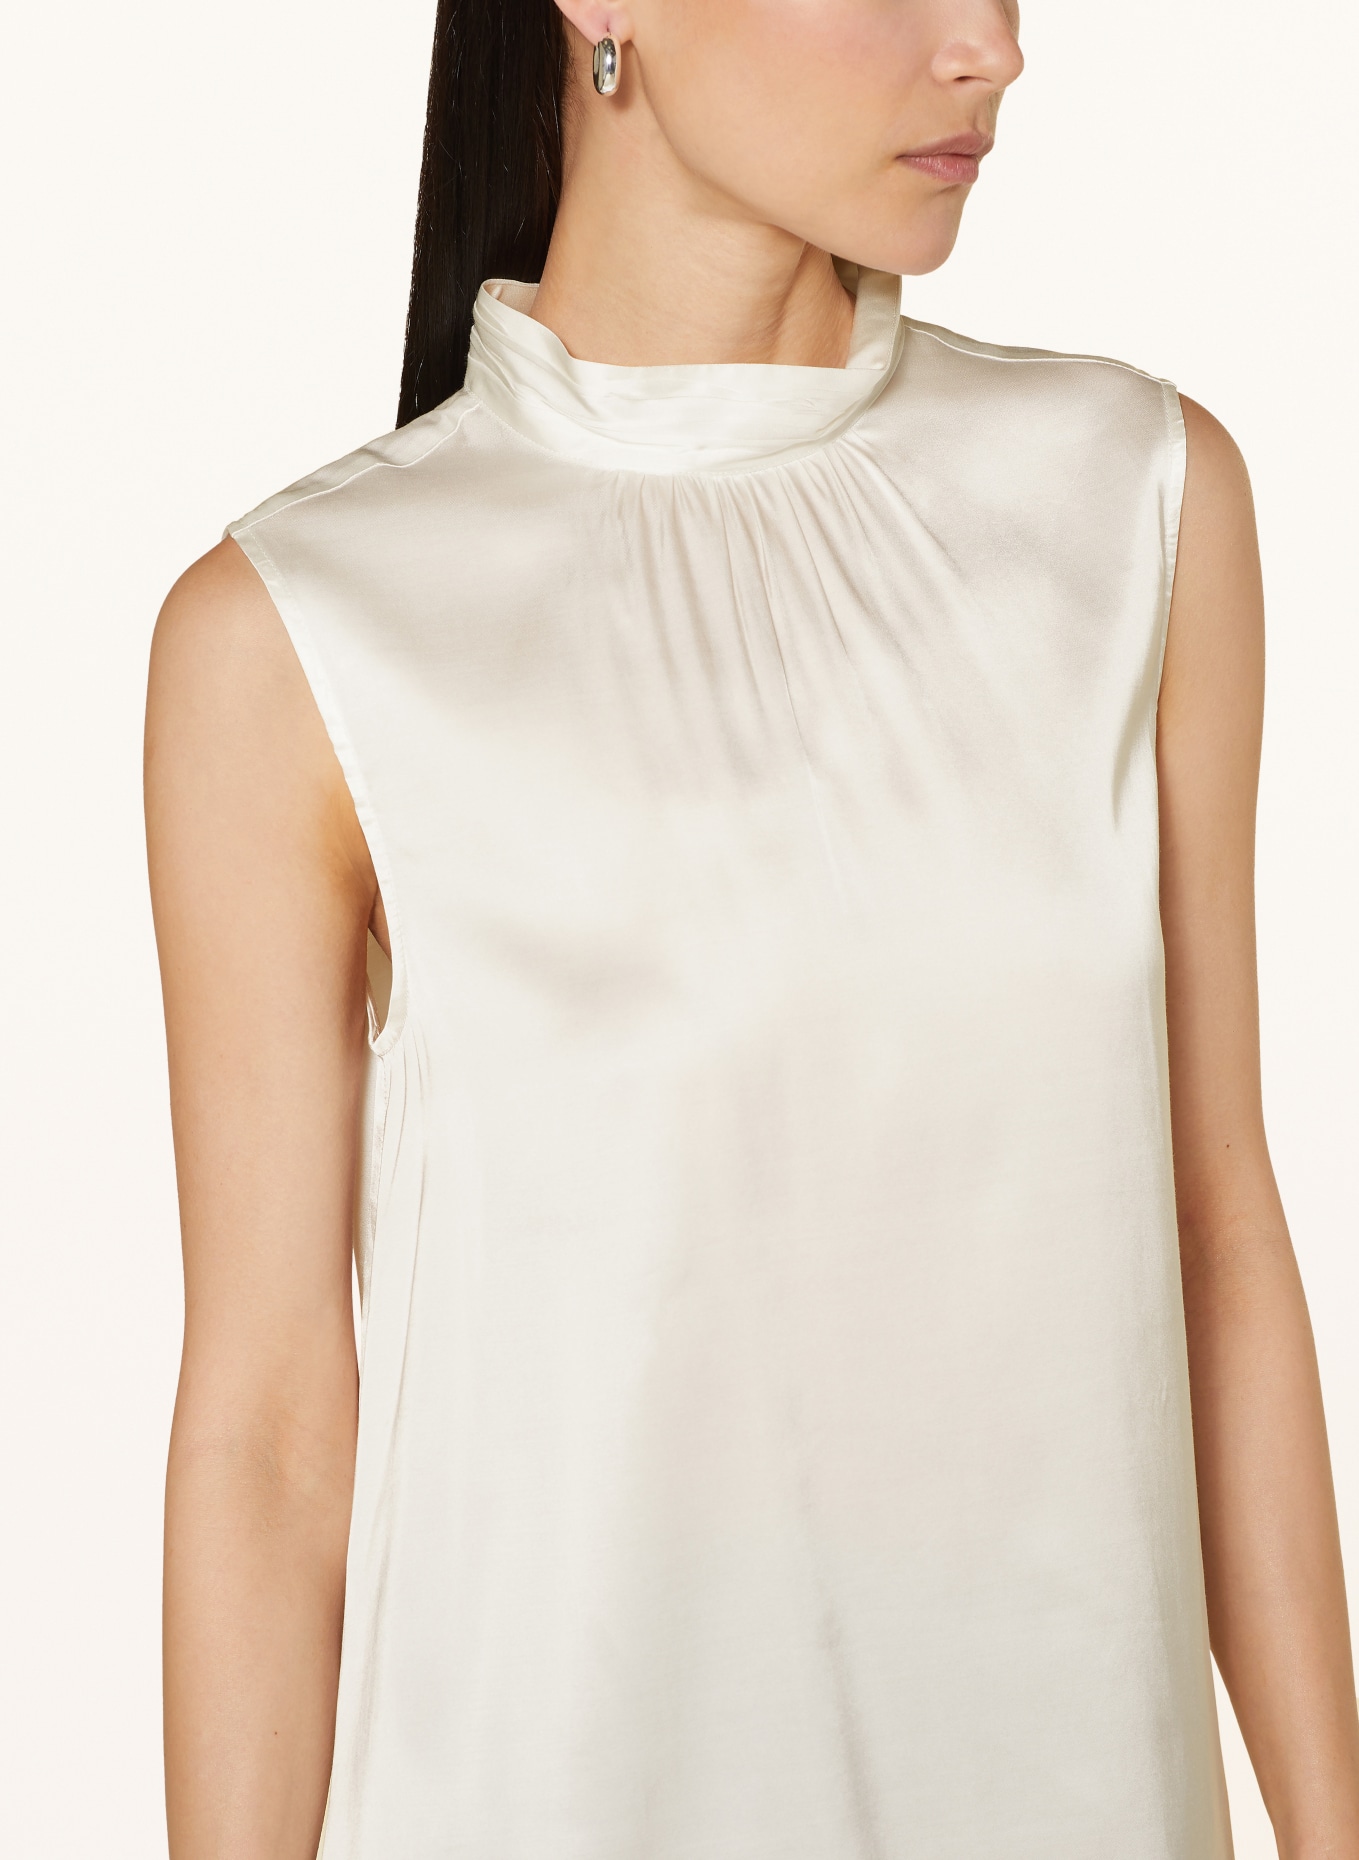 MRS & HUGS Blouse top in satin, Color: WHITE (Image 4)